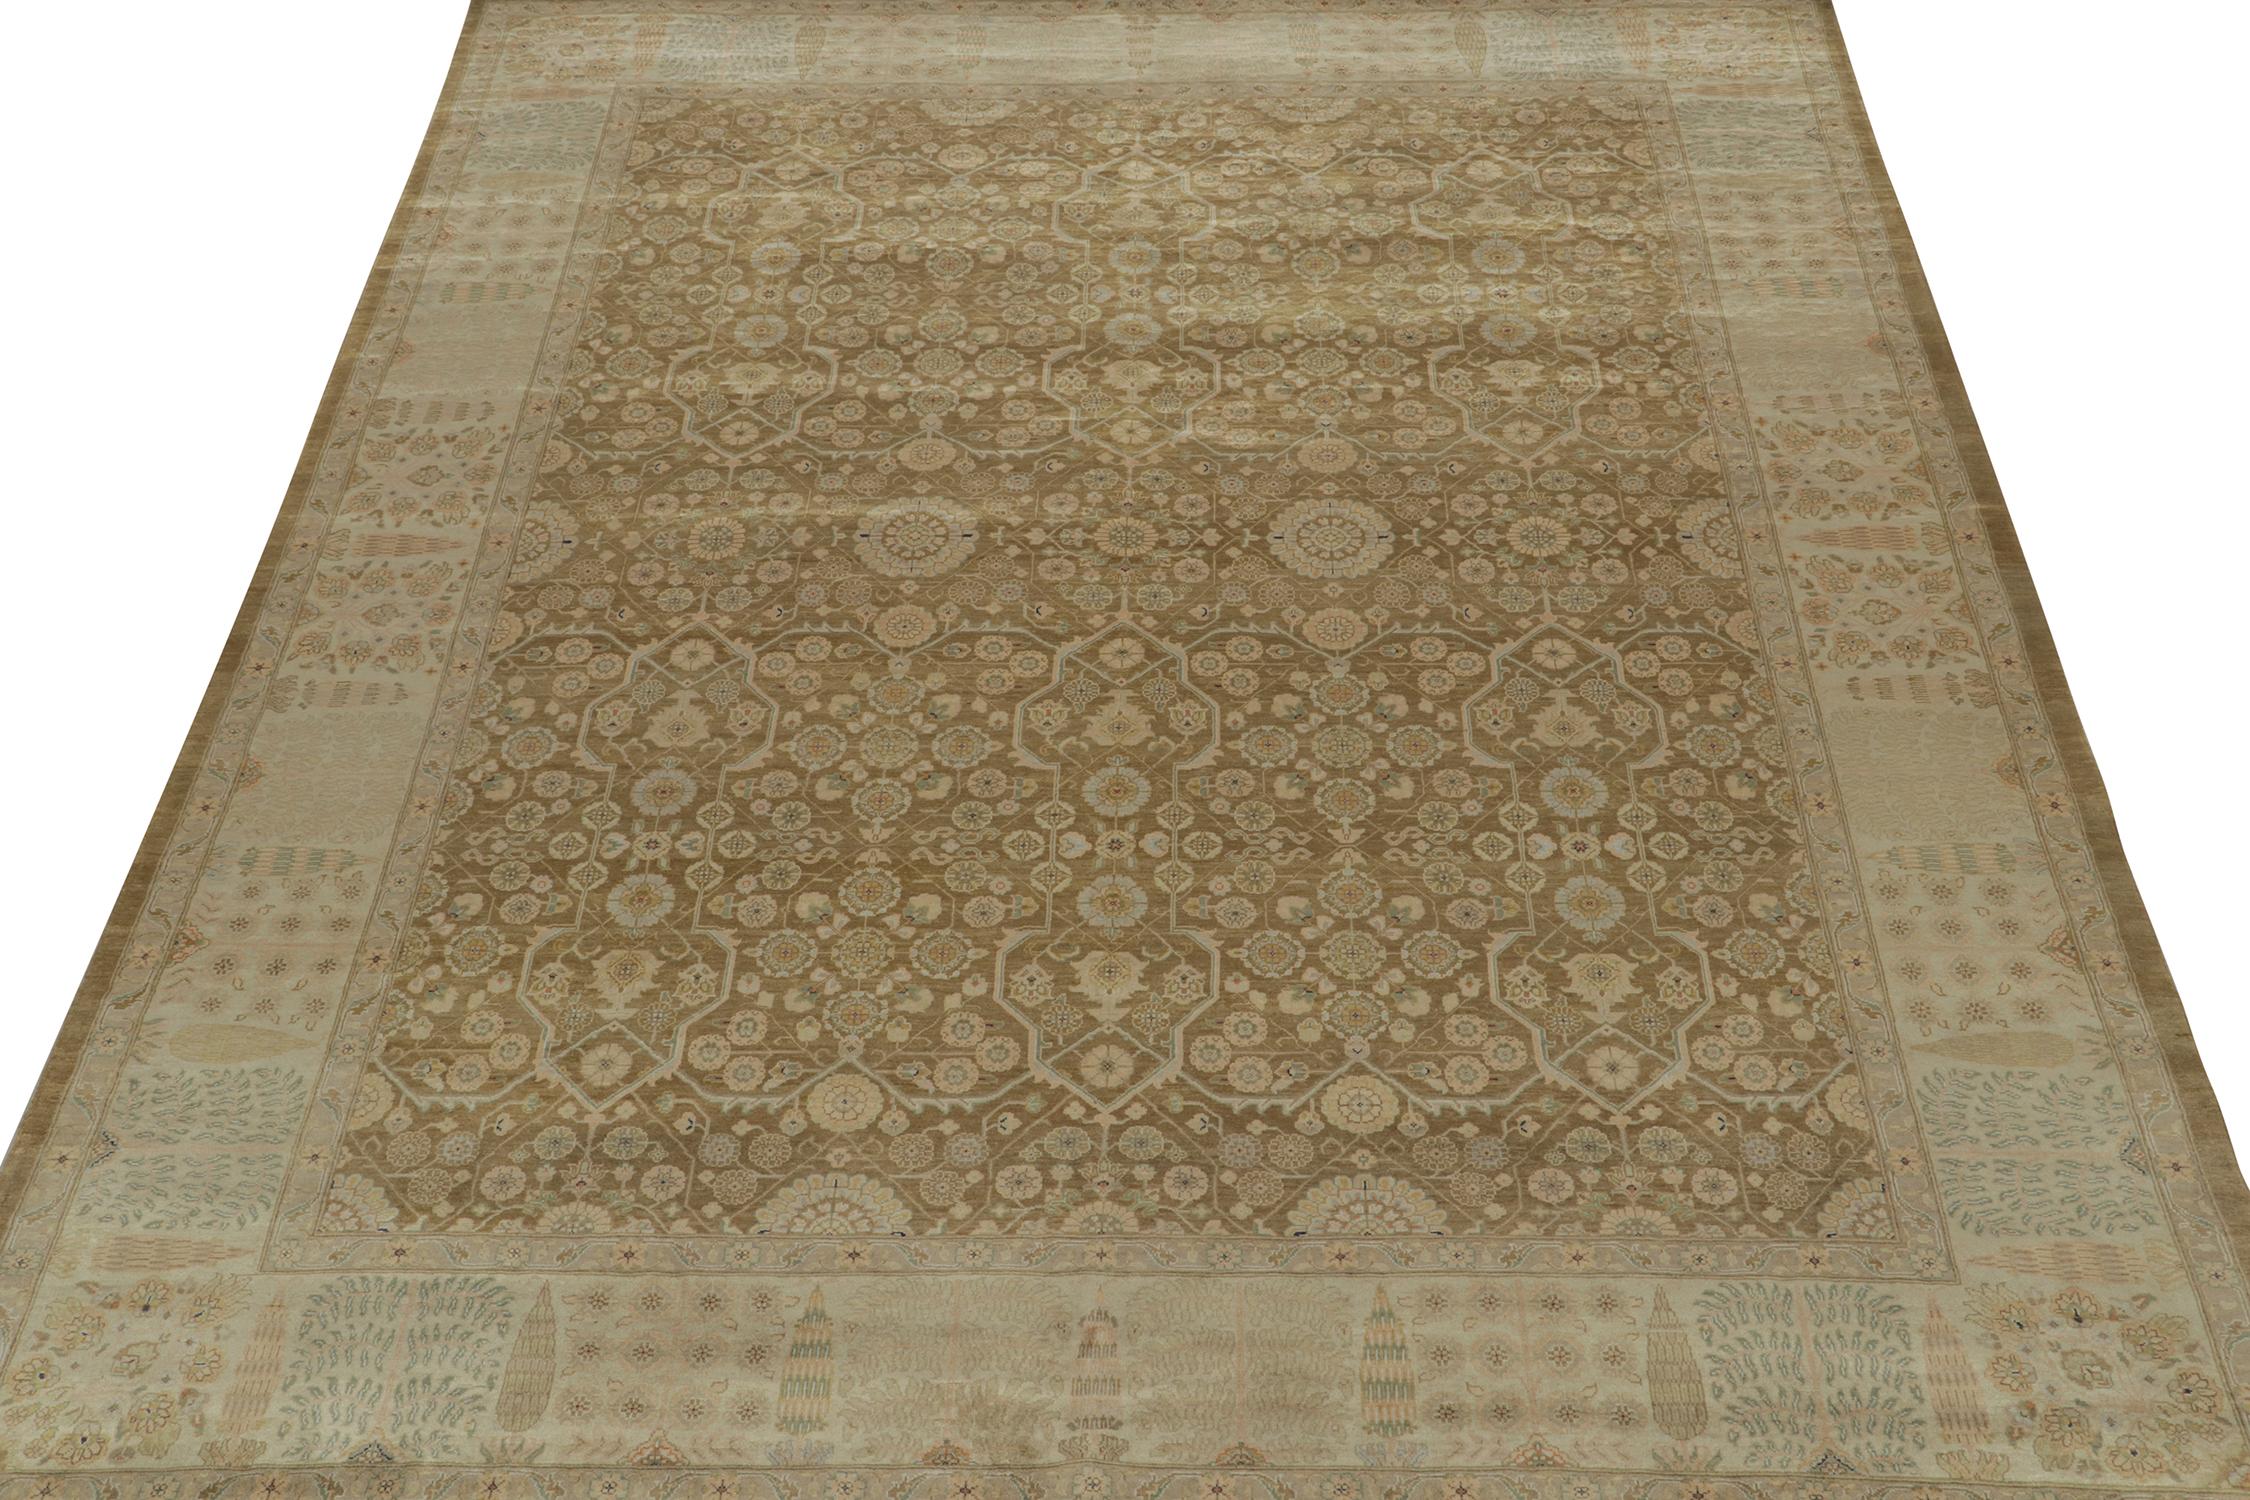 Indian Rug & Kilim’s Classic Tabriz Style Rug in Green, Beige and Brown Floral Patterns For Sale